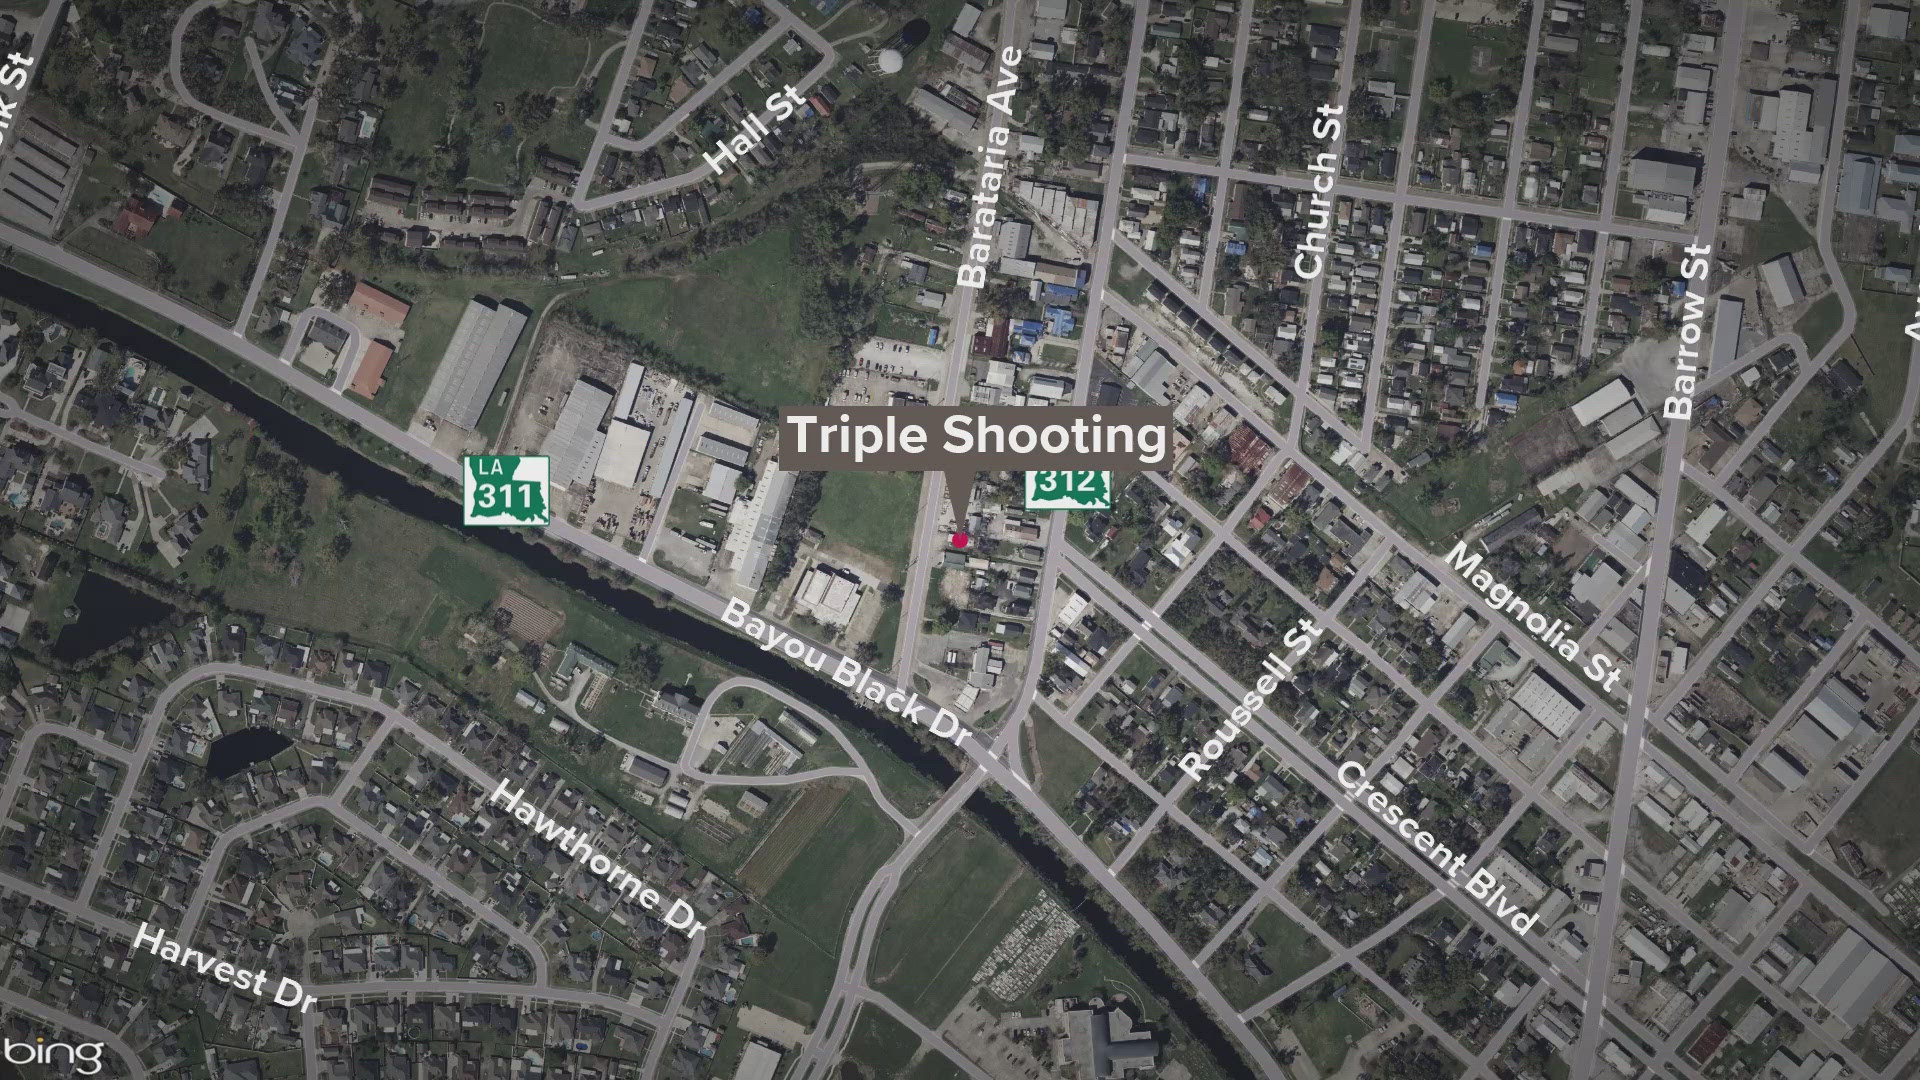 Three people wounded in shooting at Thirsty's Bar.